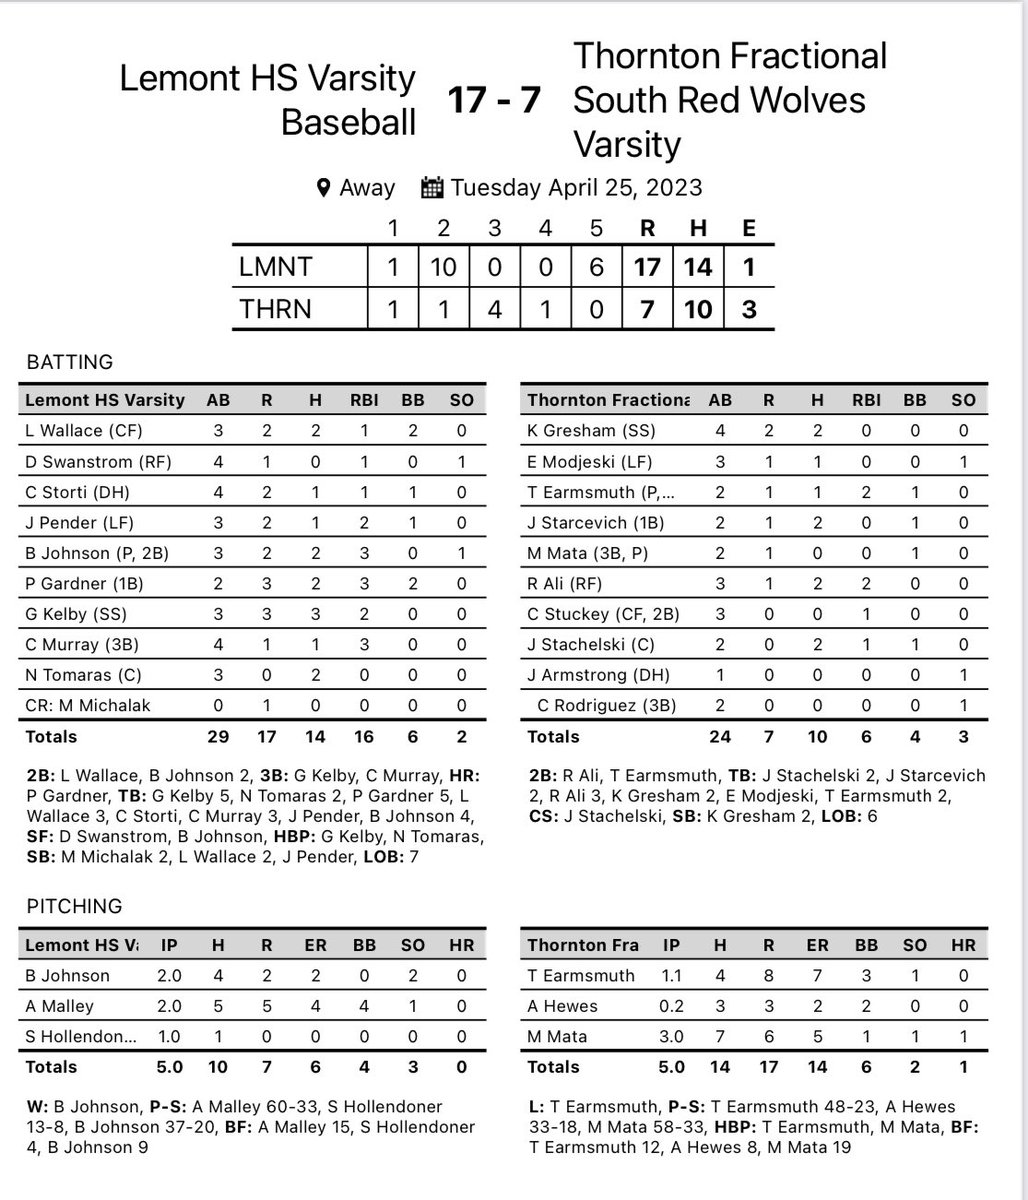 Good win today! Battled some adversity and came out on top. Great #TEAM win! #WN #WeAreLemont Highlights @gavin_kelby 3-3 2RBI 3b @paddyg2215 2-2 3RBI HR 2BB 3R @L_Wallace16 2-3 2b RBI 2BB 2R @Bjohnson_902 2-3 2-2b @conormurr1 3b 3RBI @NoahTomaras 2-3